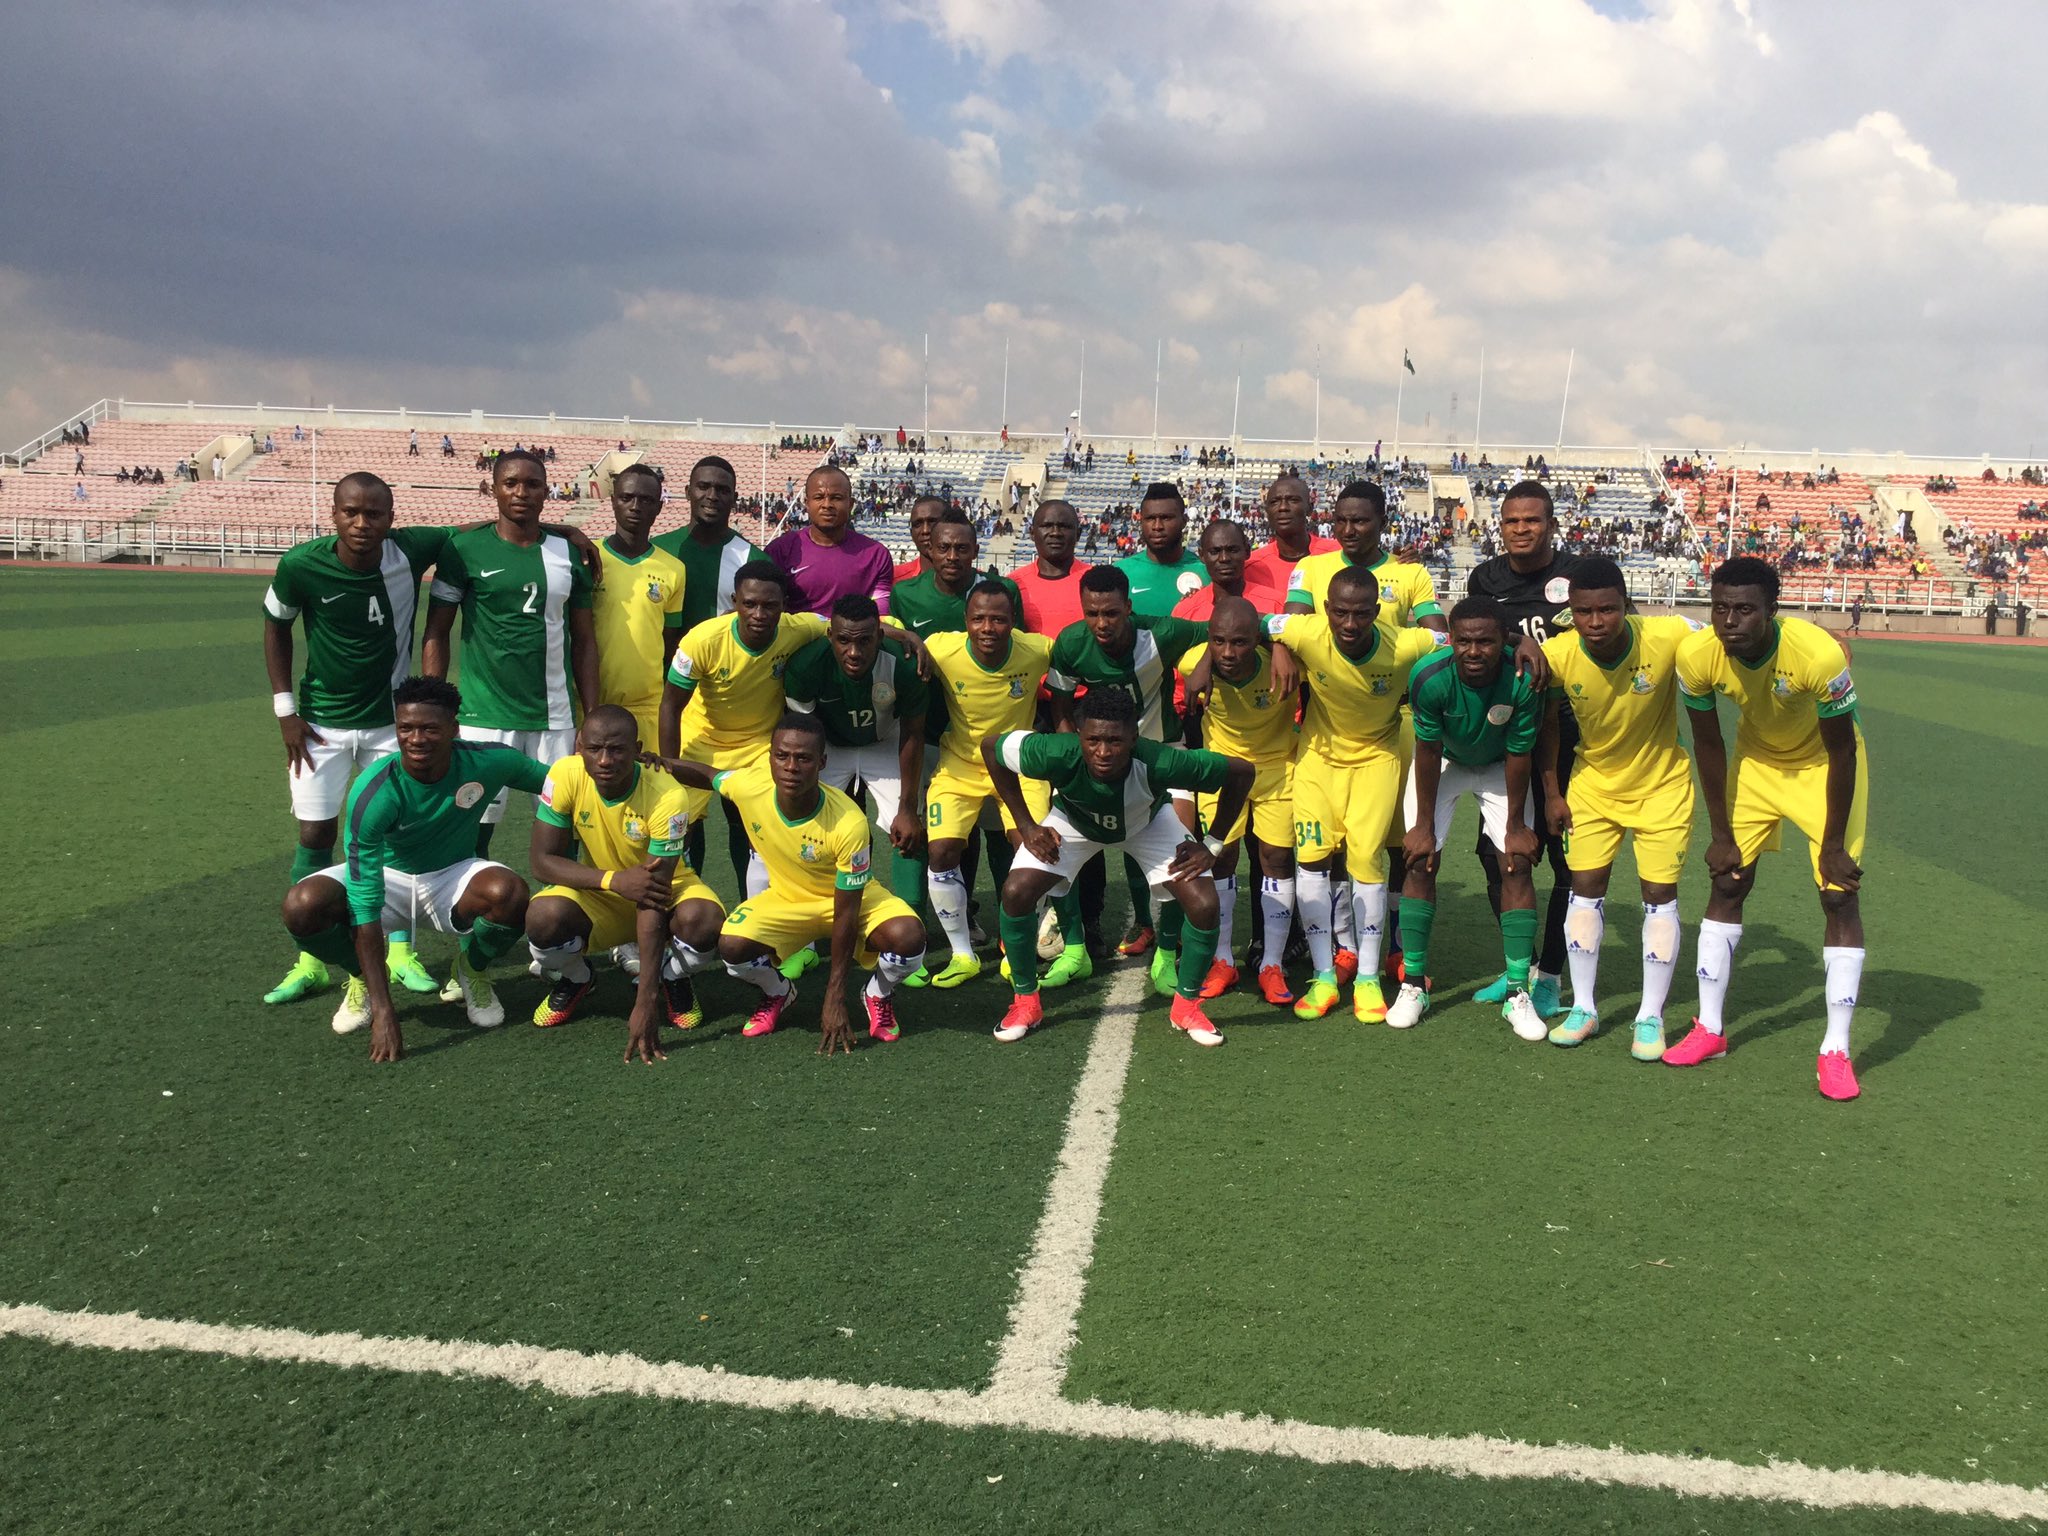 Ekpo Warns Home Eagles: Be Ready For Hostile Welcome In Cotonou